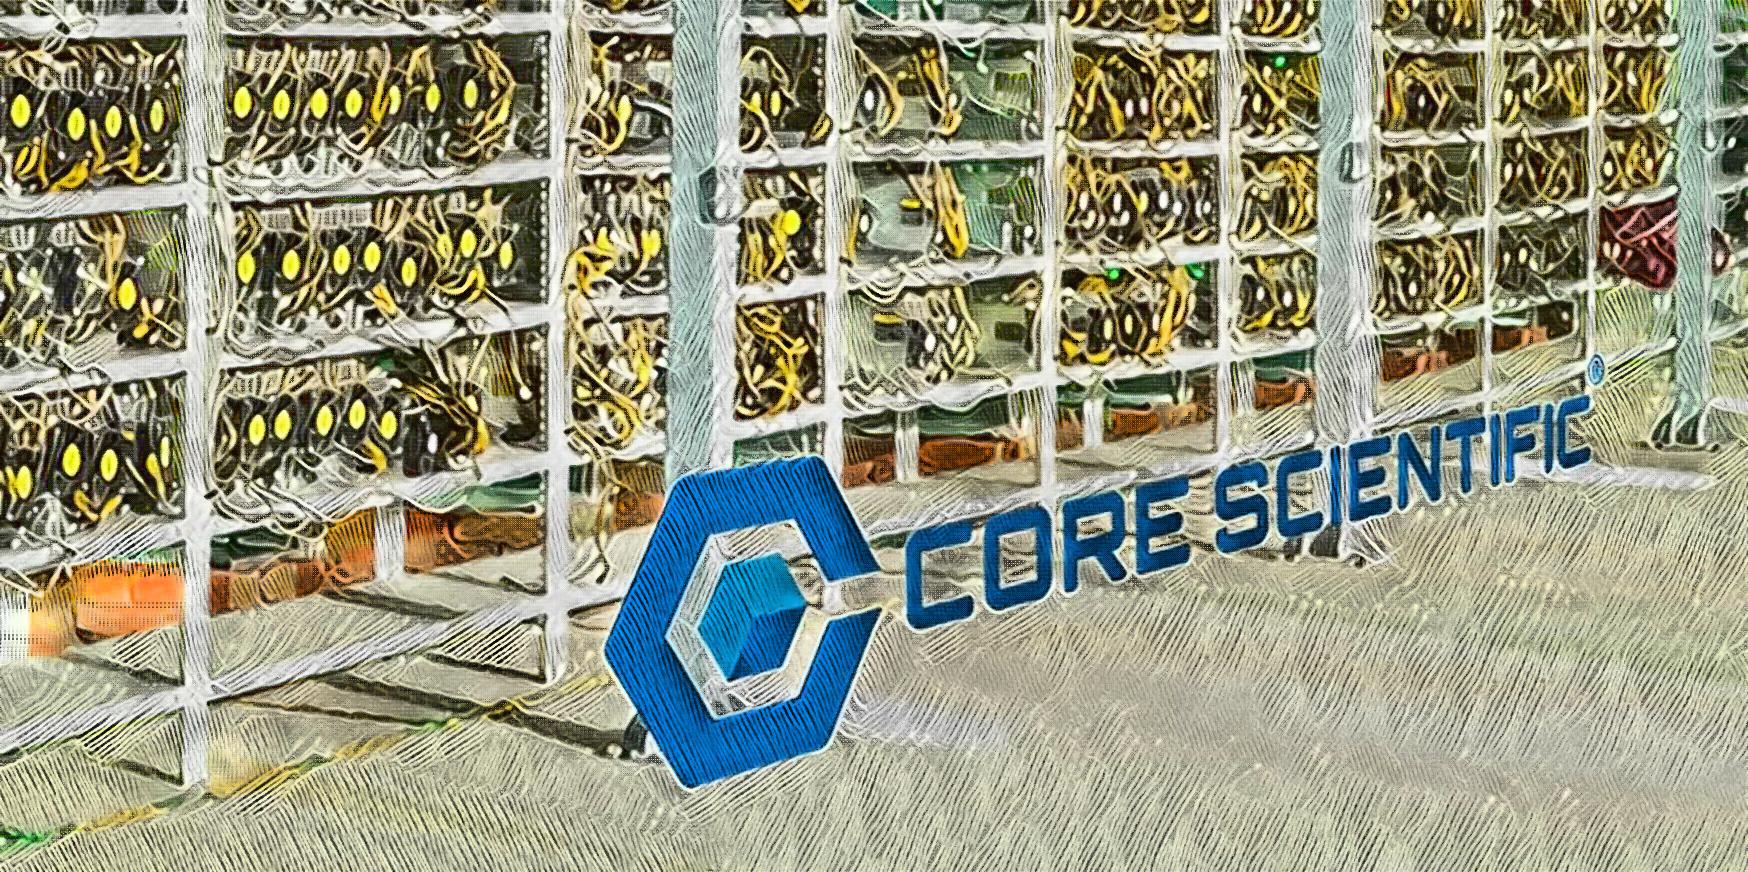 Core Scientific: Bitcoin mining giant files for bankruptcy